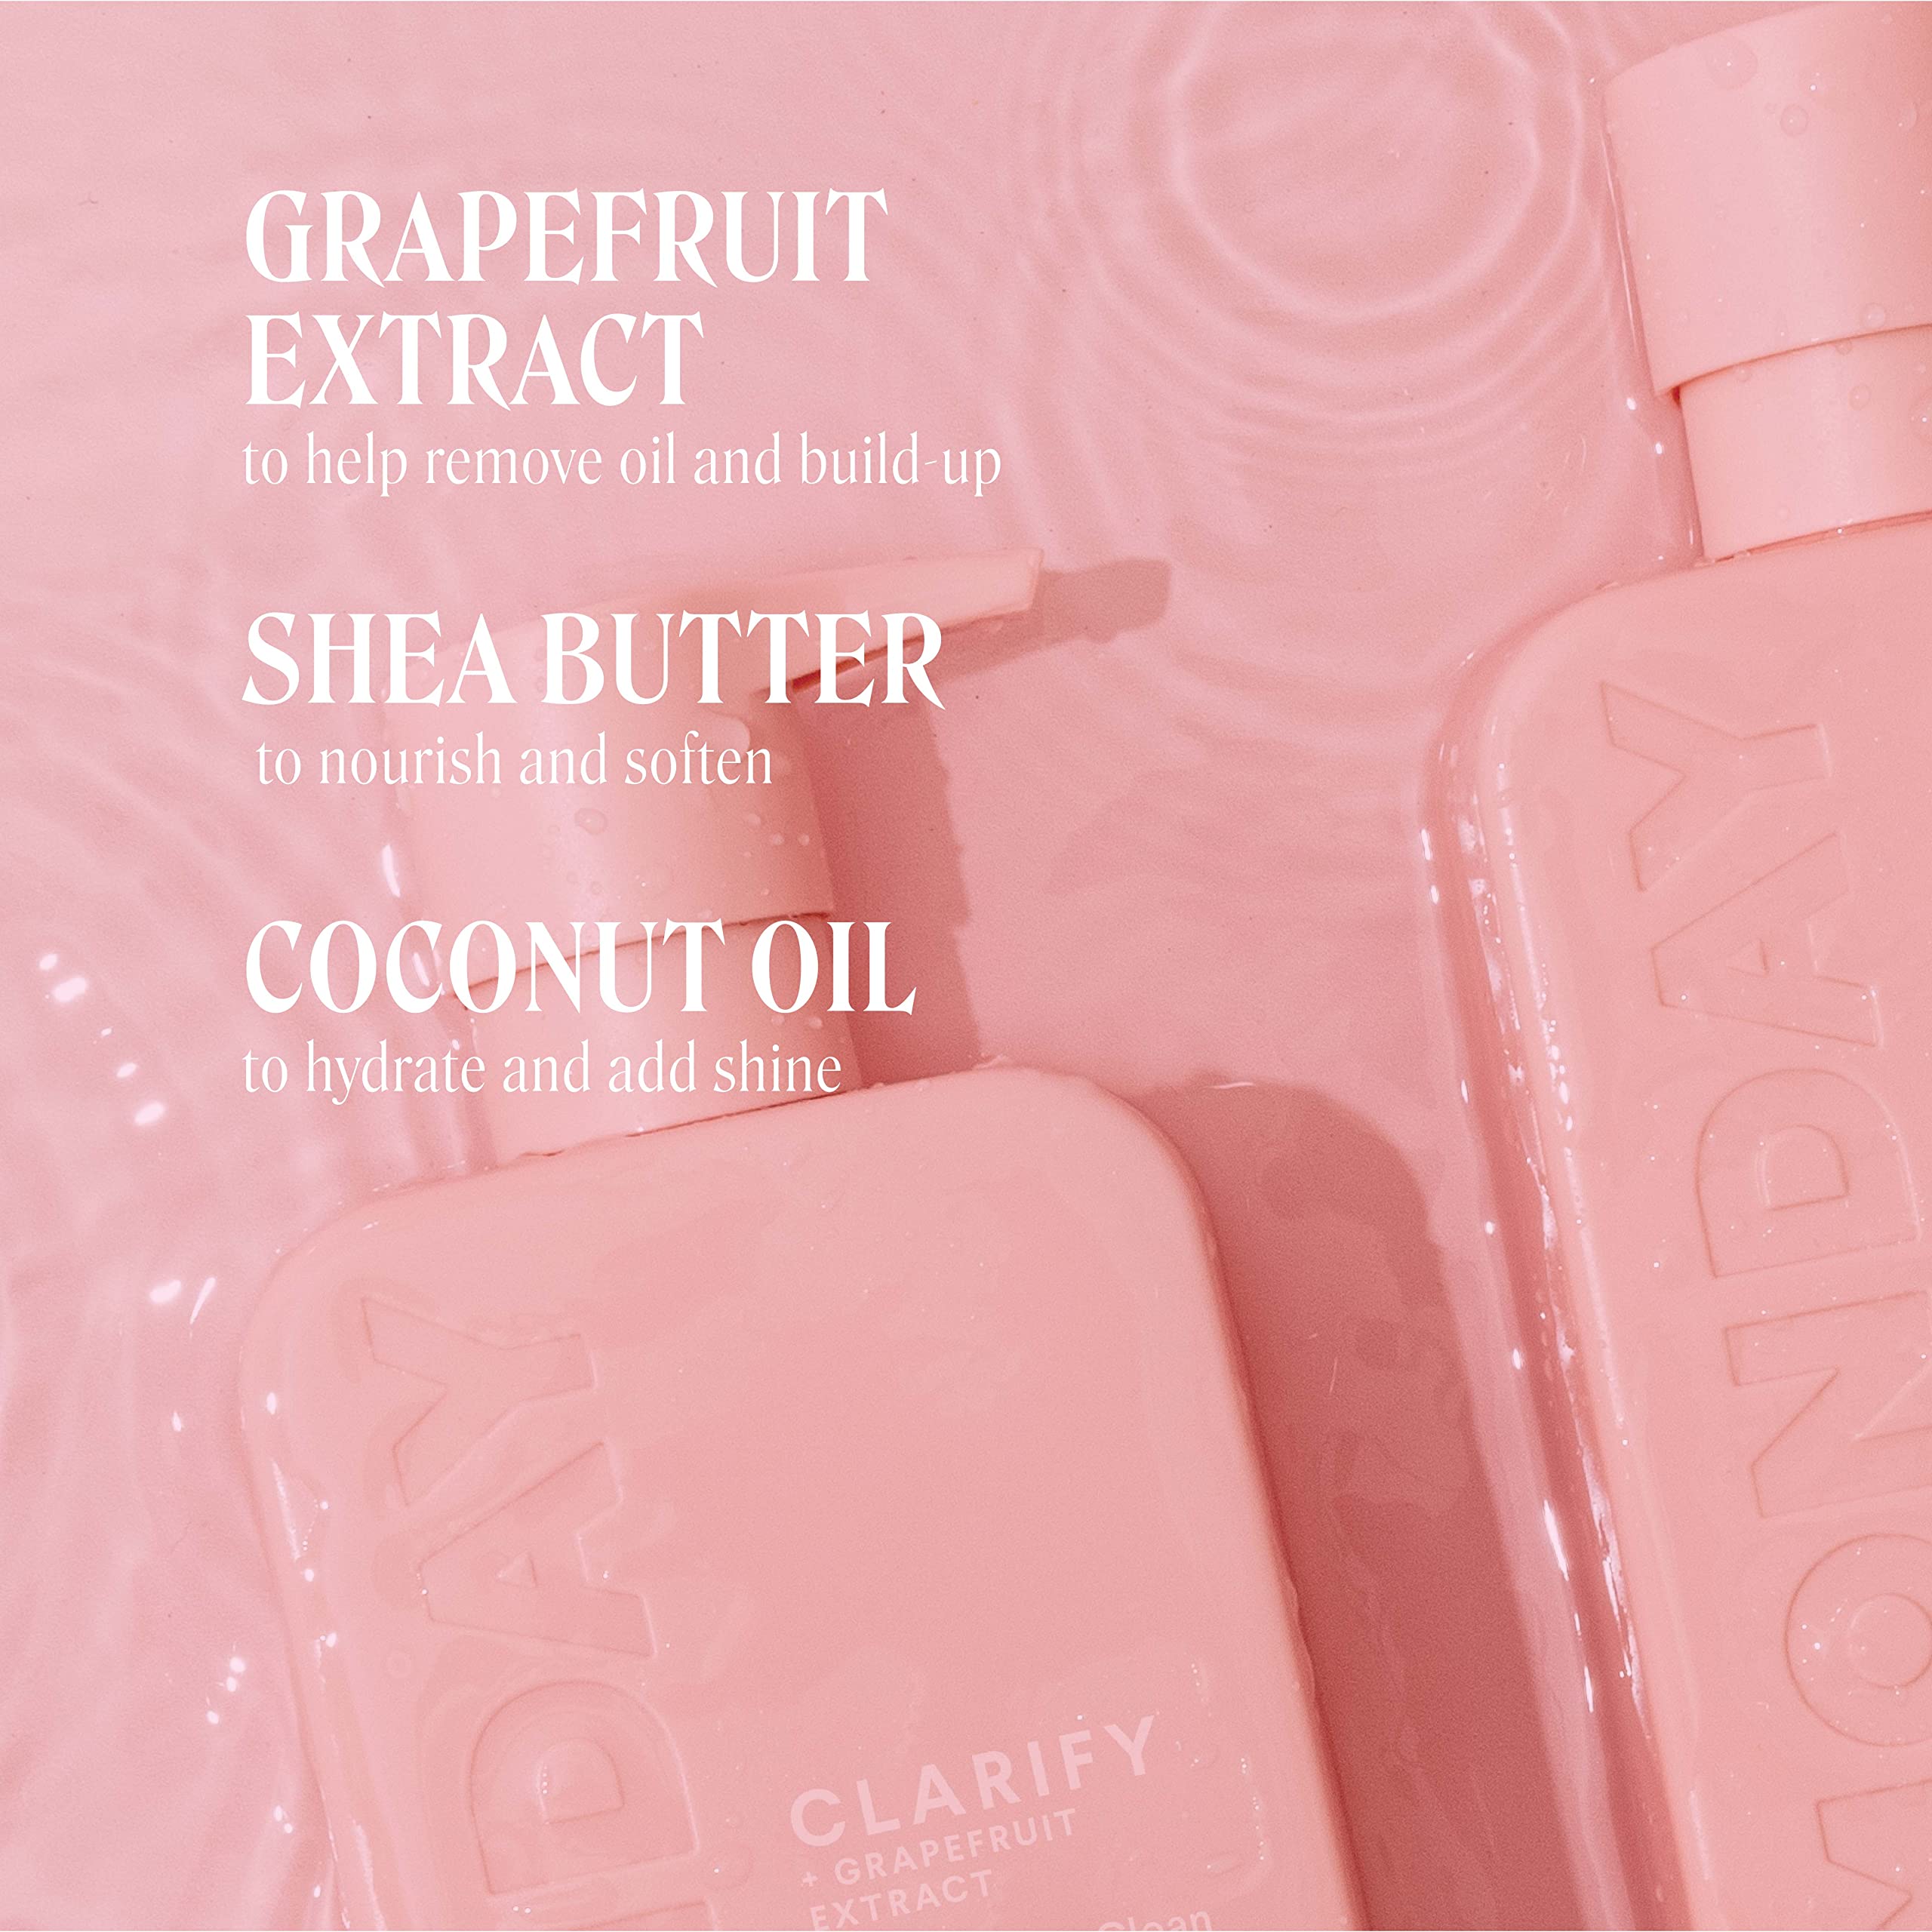 MONDAY HAIRCARE Clarify Shampoo 12oz for Oily Hair, Made with Grapefruit Extract, Coconut Oil and Vitamin E (350ml)